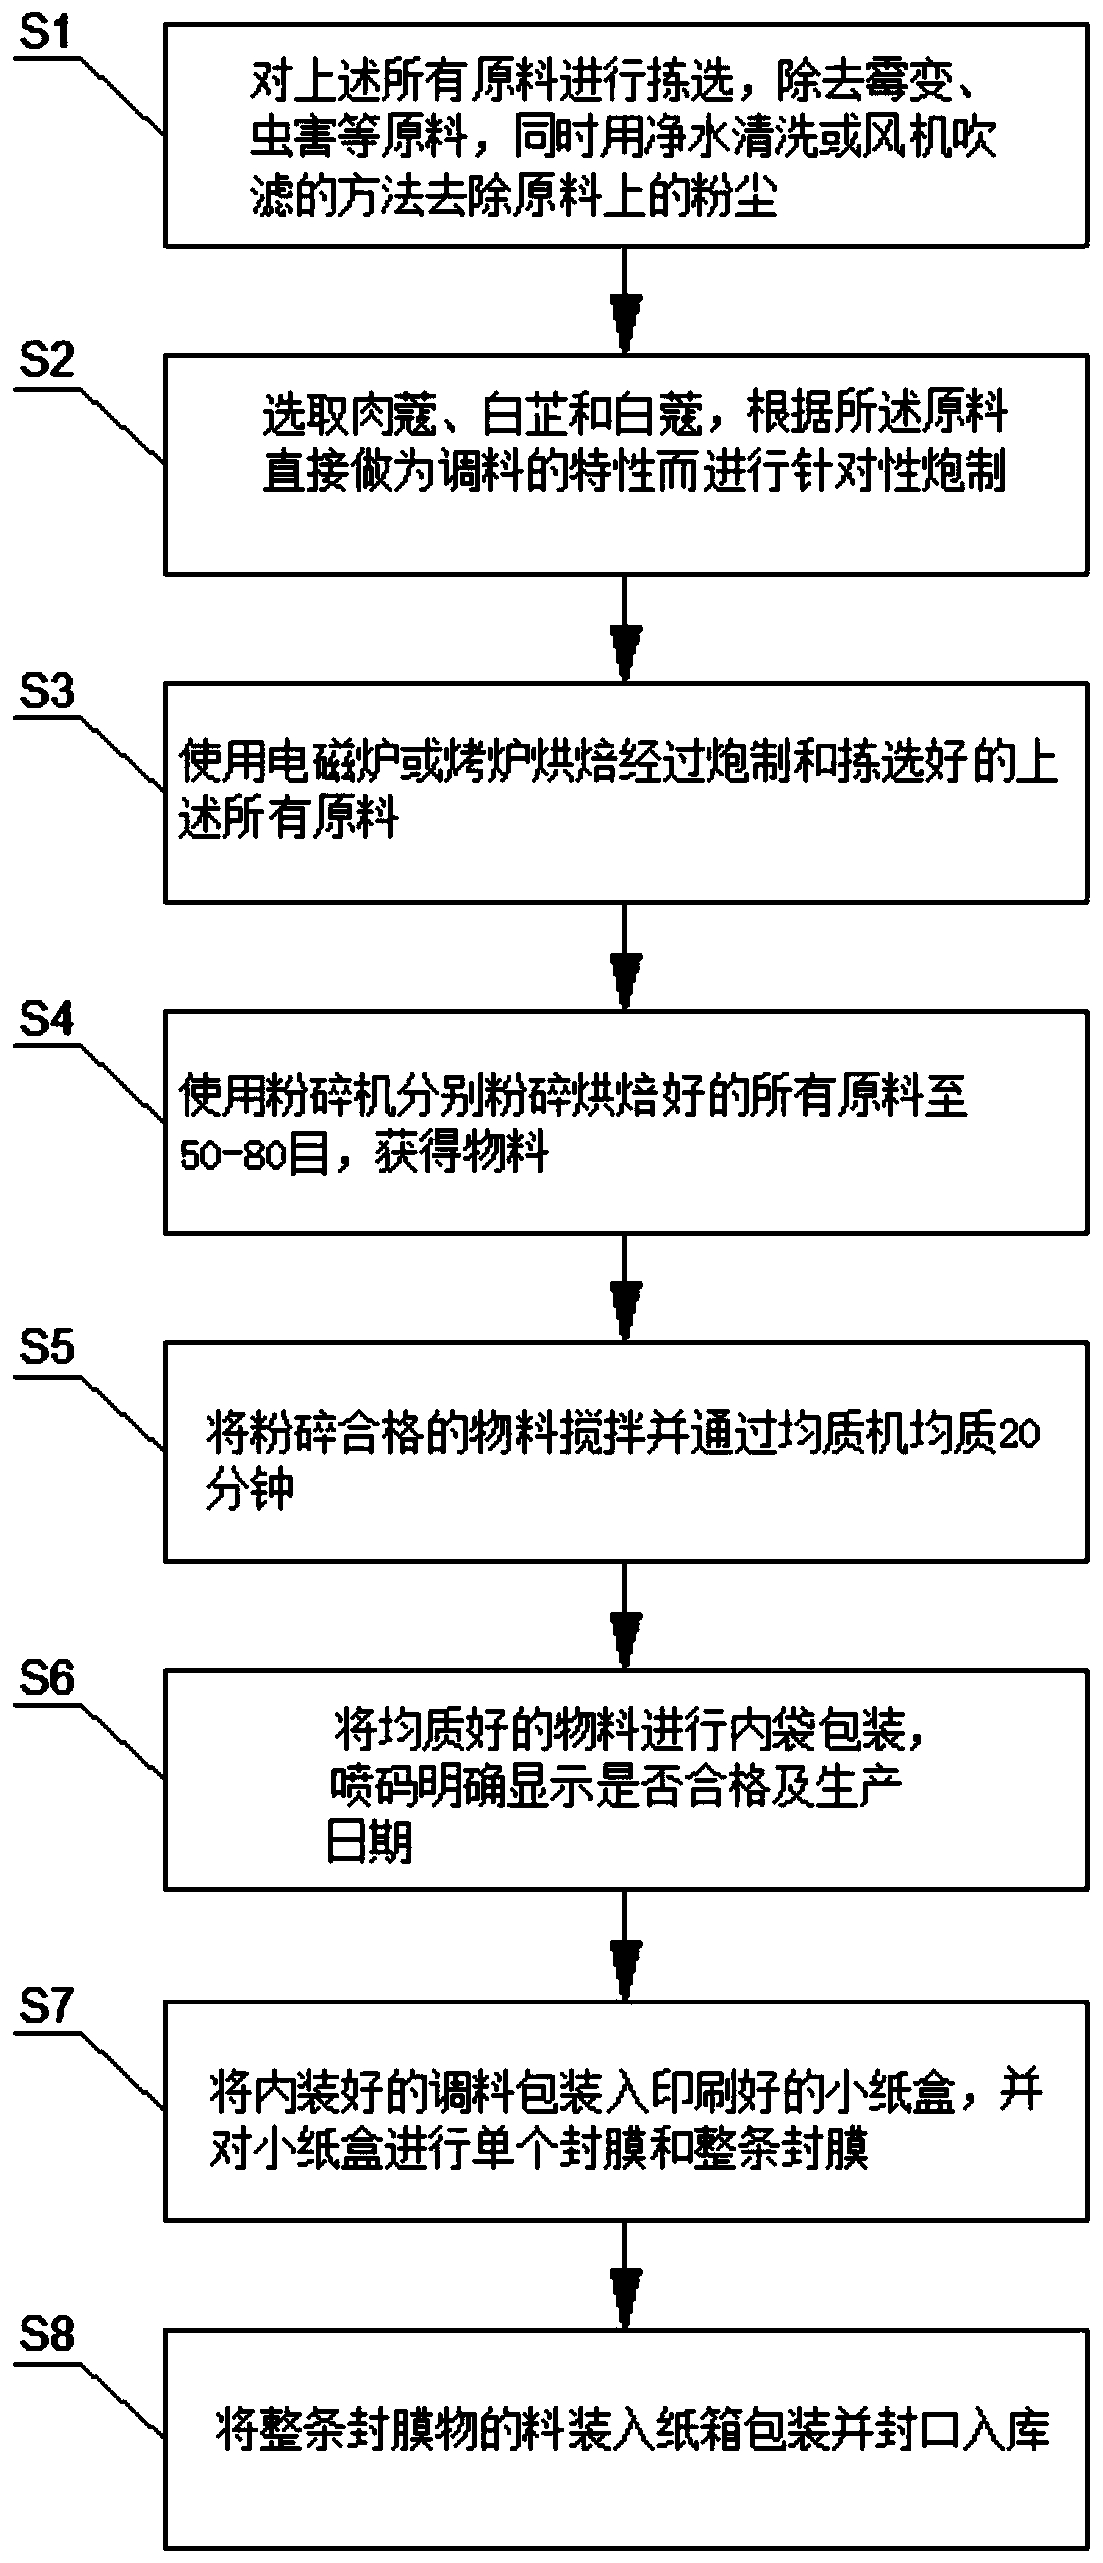 Formula and preparation method of plant condiment with medicinal food effect